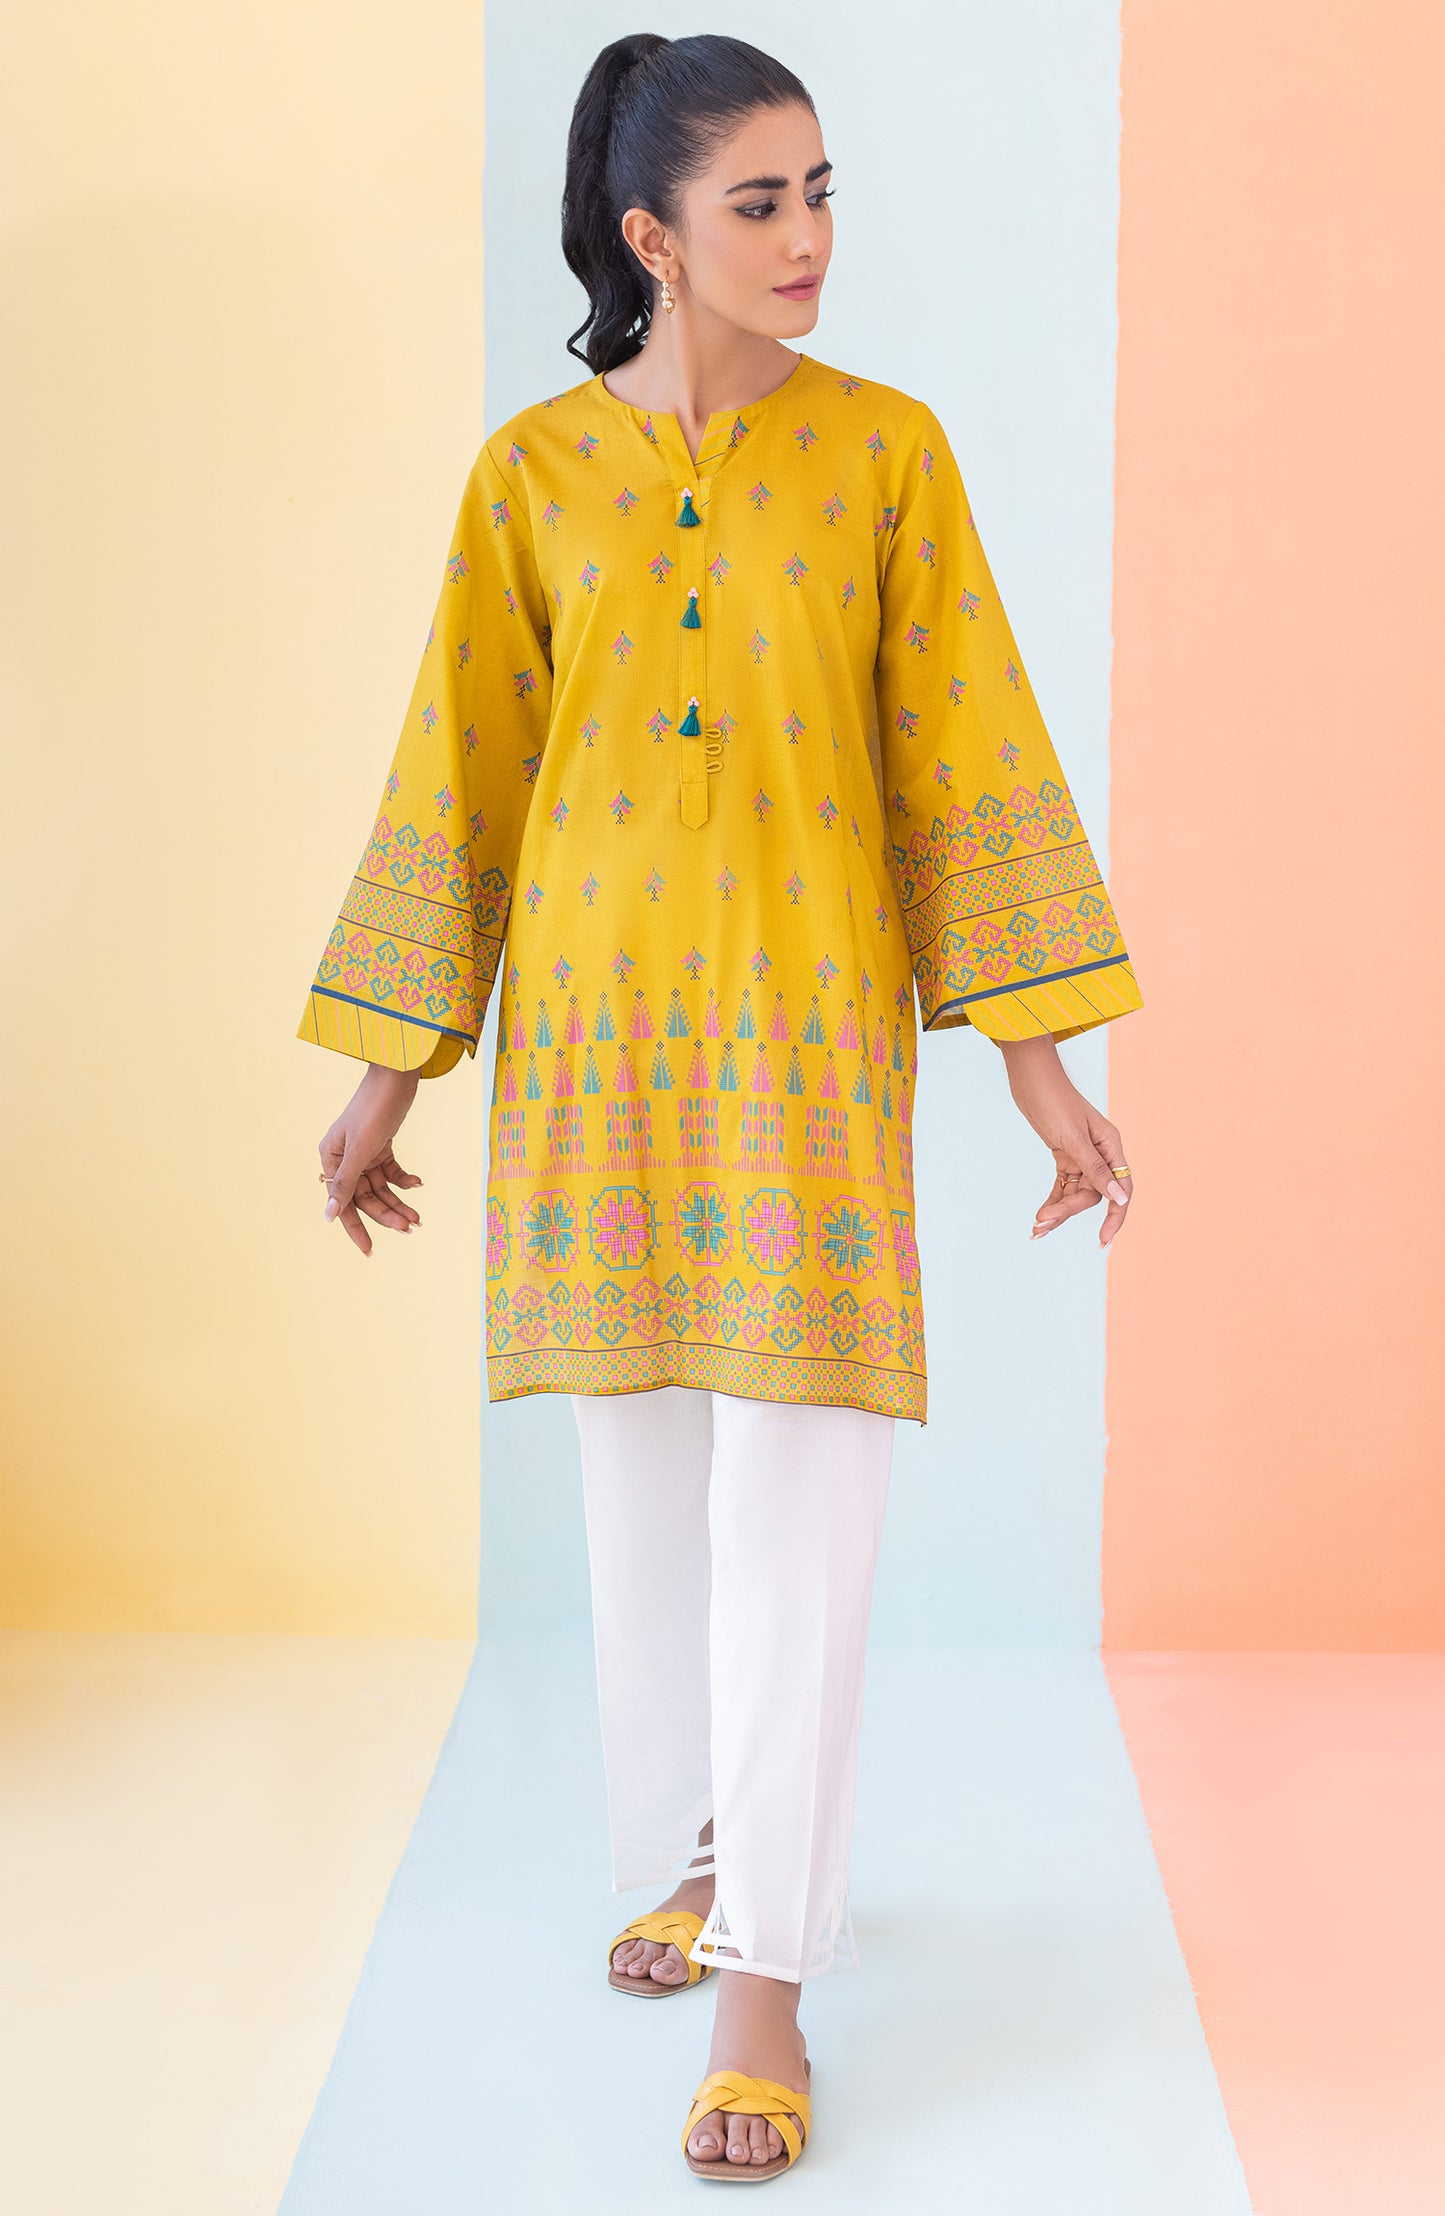 HCS-S-22-085 YELLOW LAWN SCSHIRT READY TO WEAR SHIRT